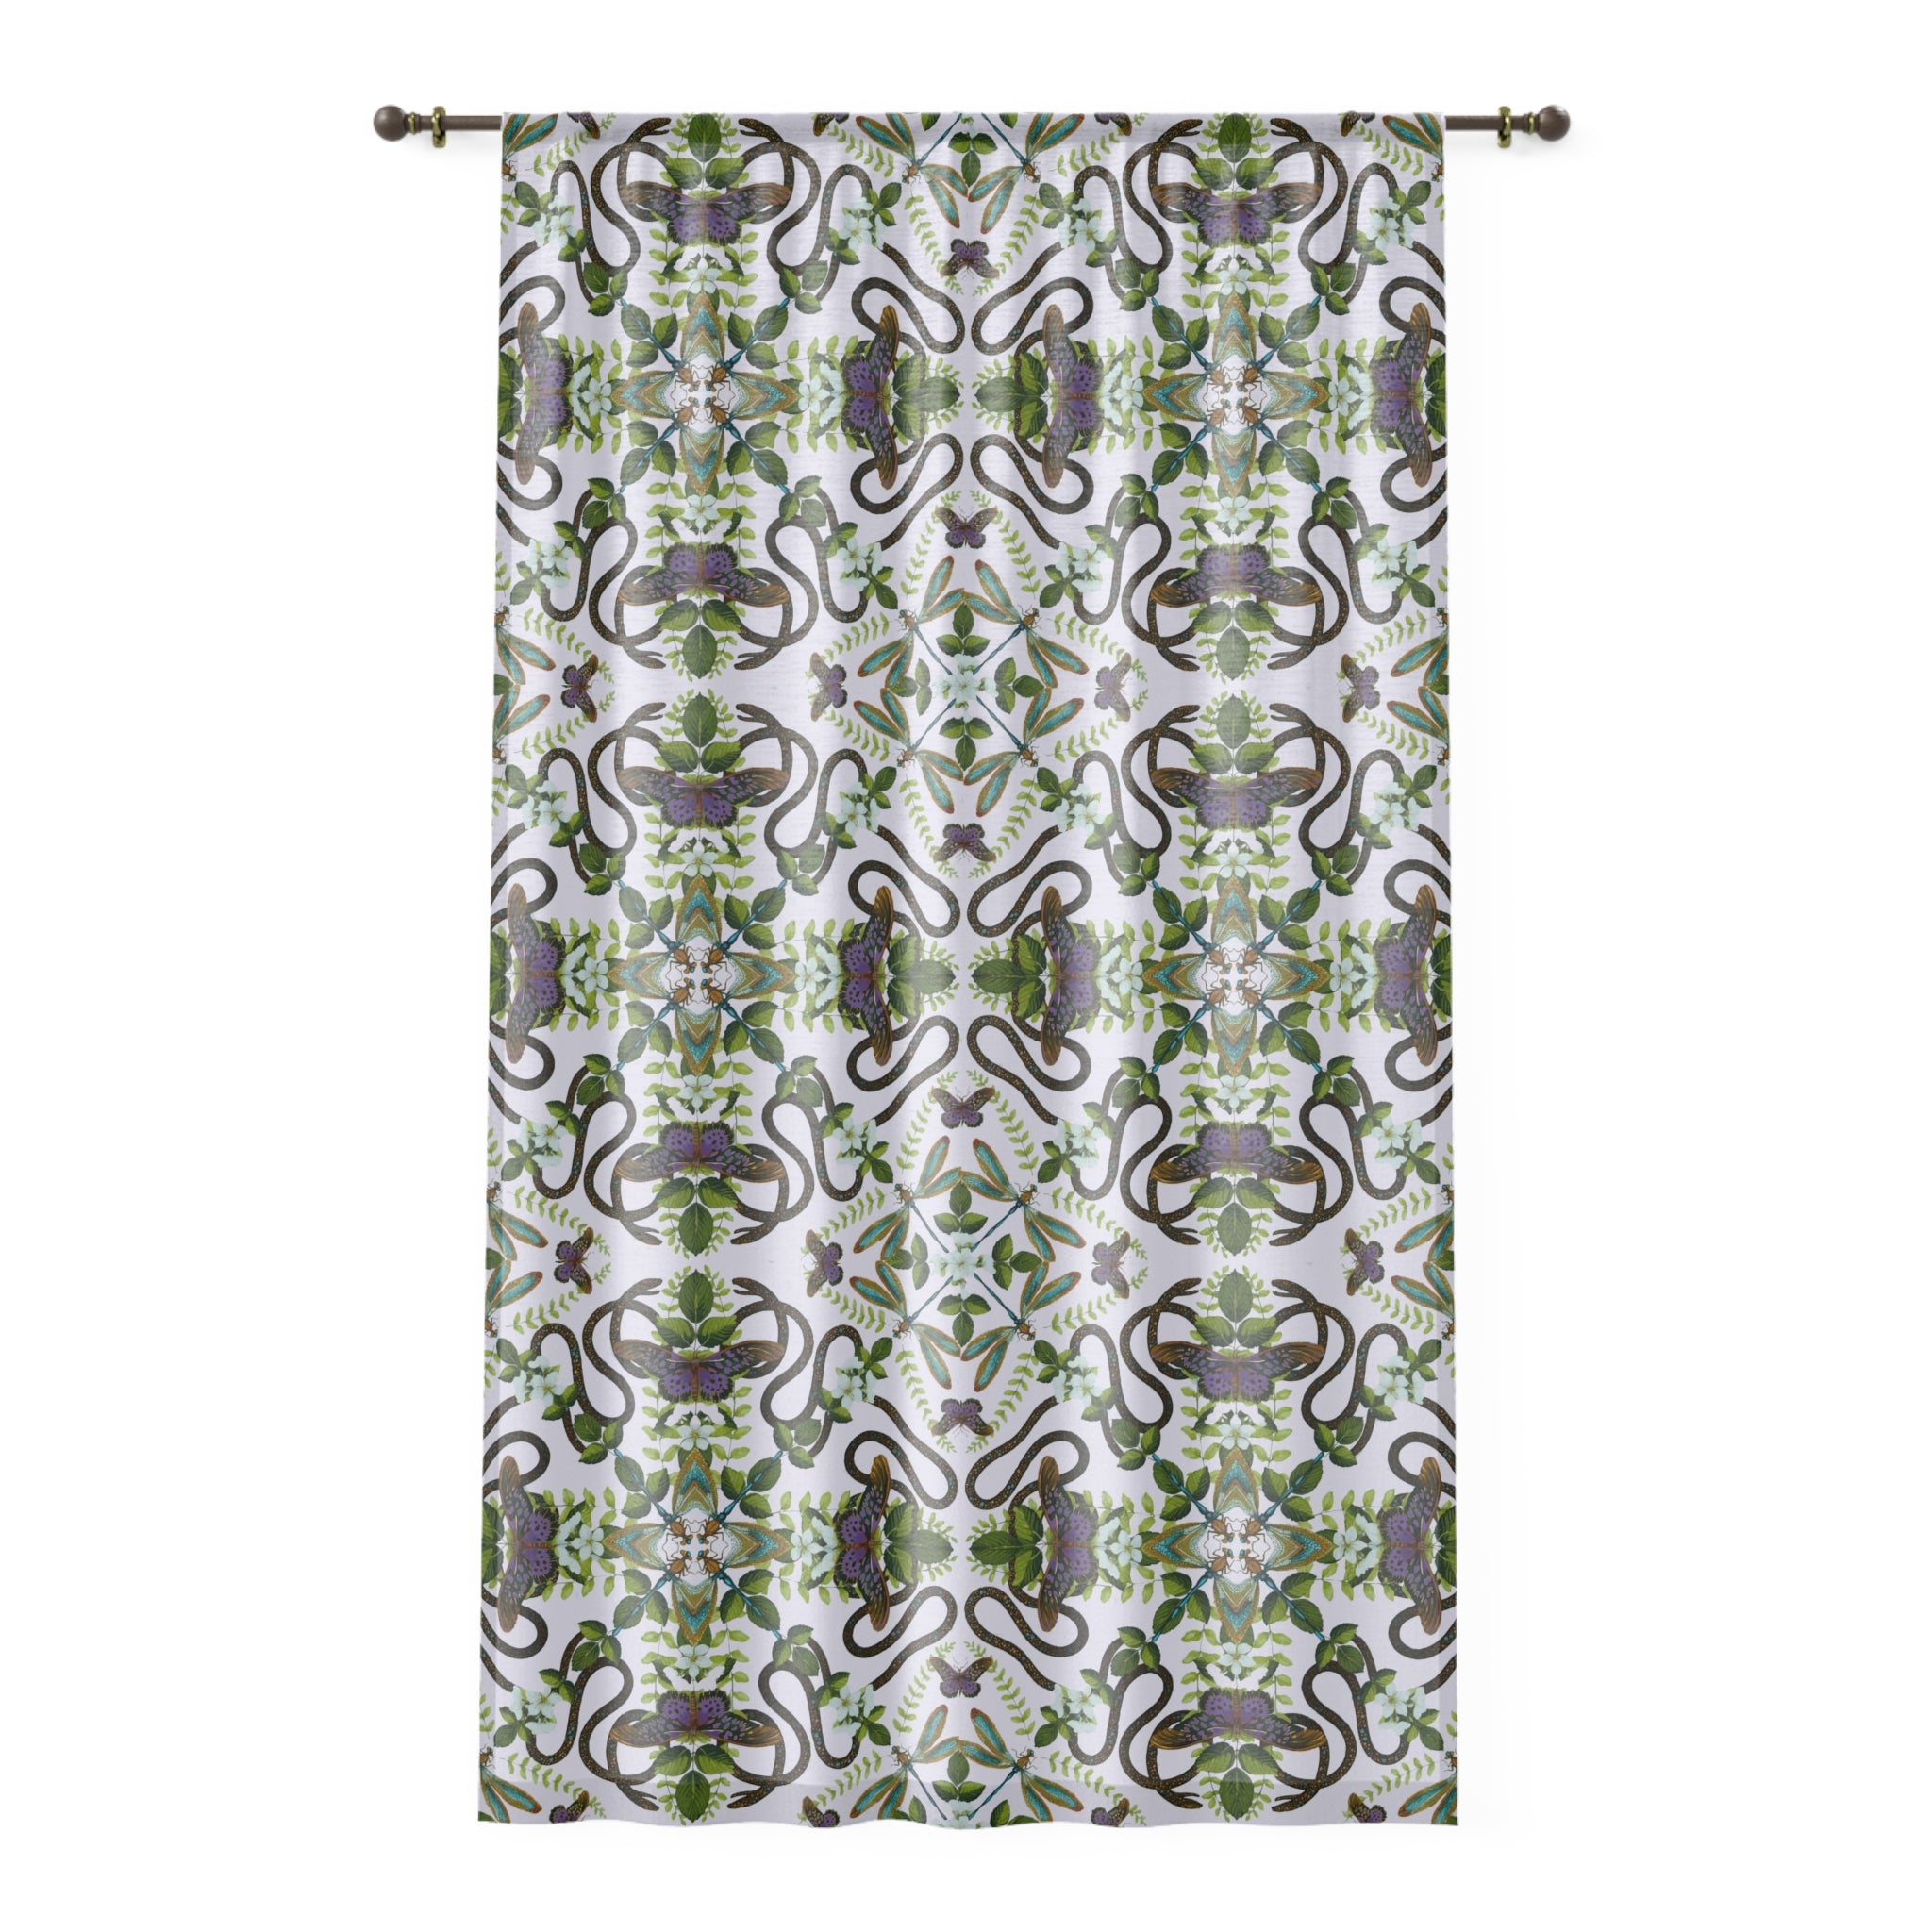 Enchanted Forest Window Curtain